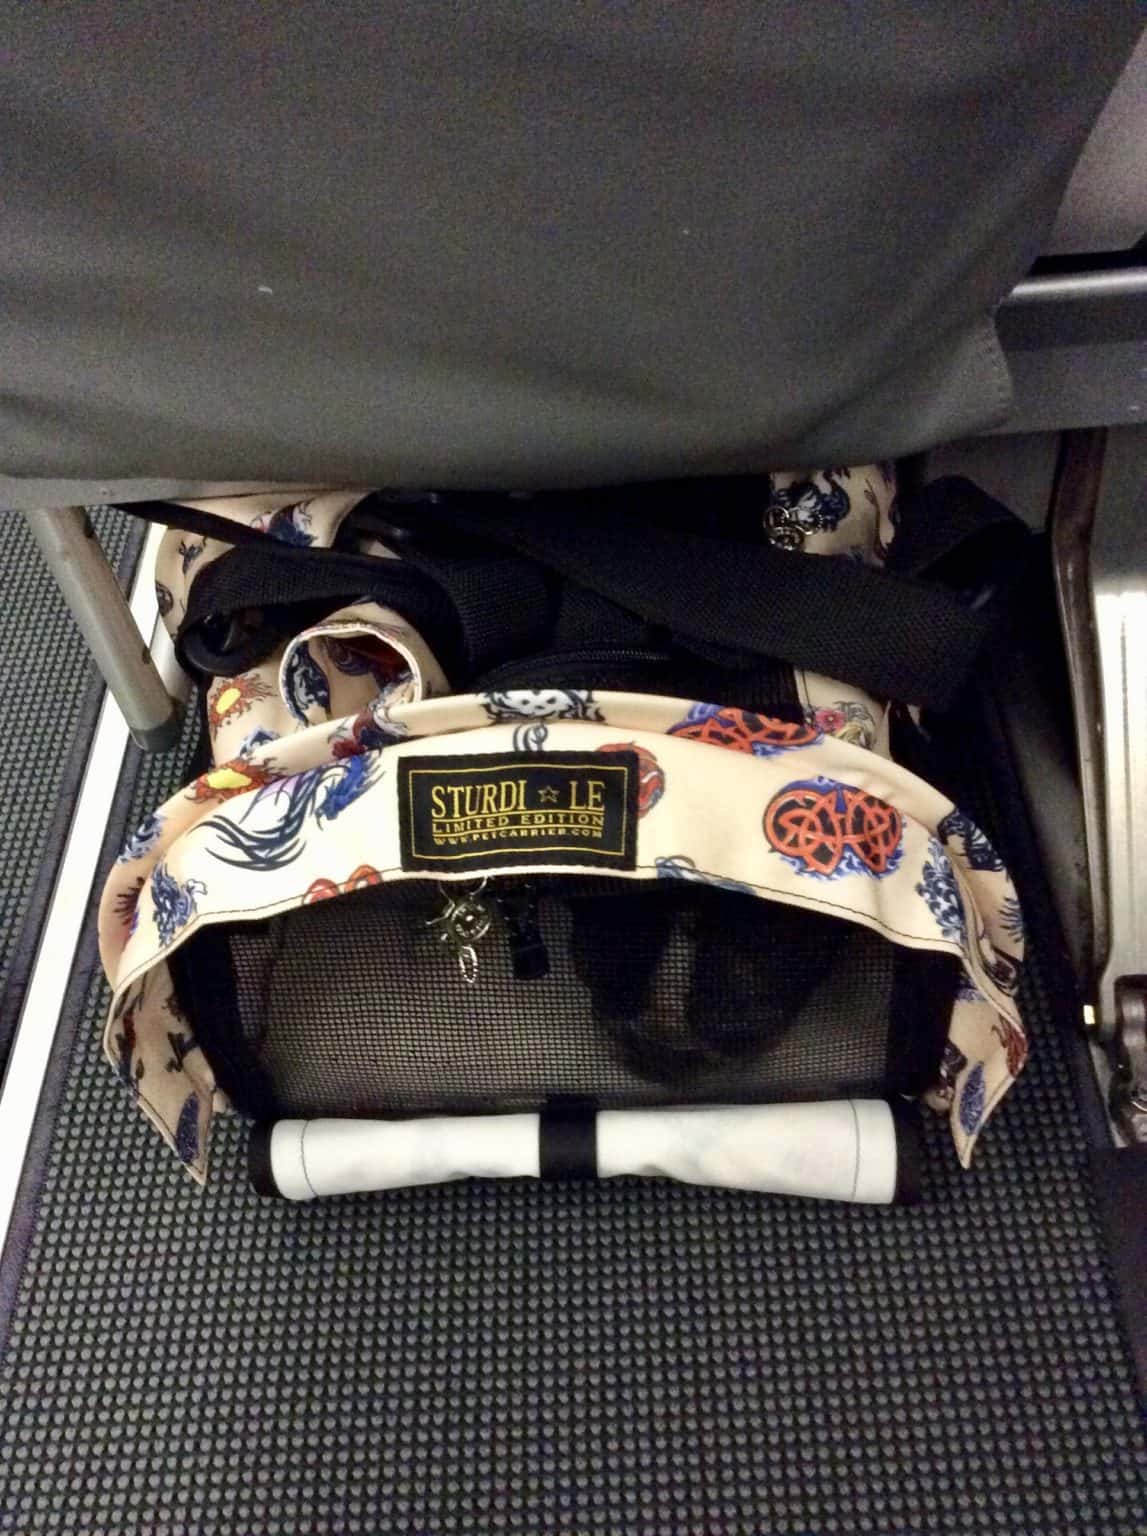 united in cabin pet weight limit